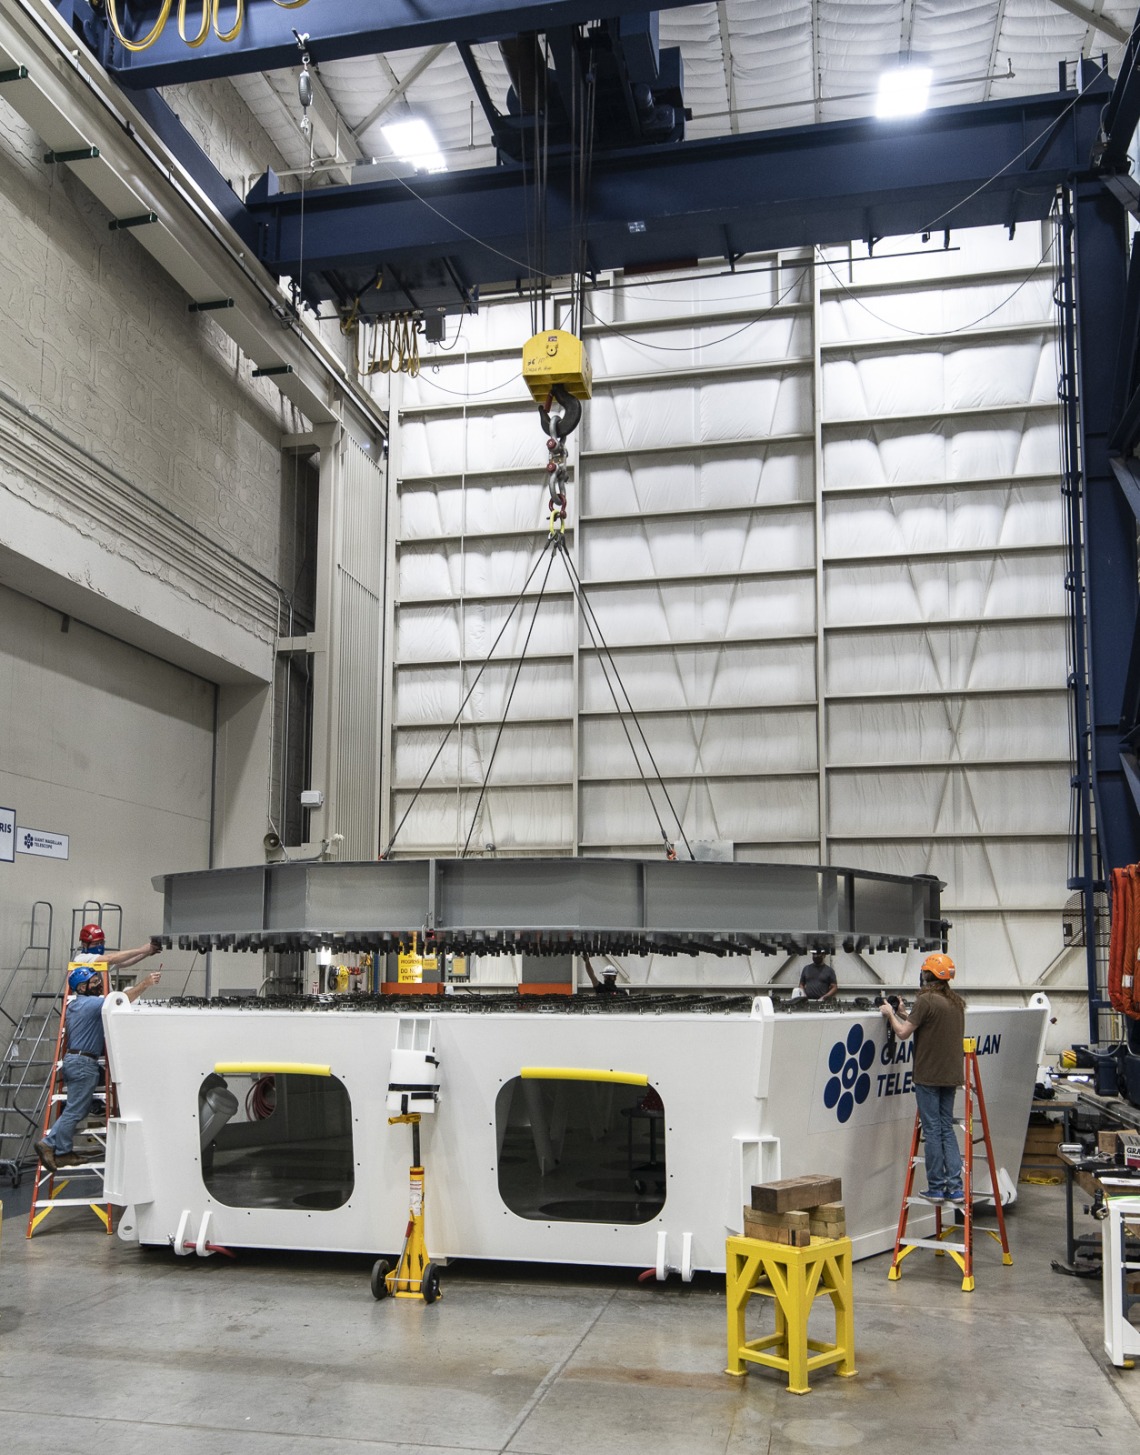 Lowering the simulator onto the test cell, June 2020. Image credit: Steven West | Richard F. Caris Mirror Lab at the University of Arizona